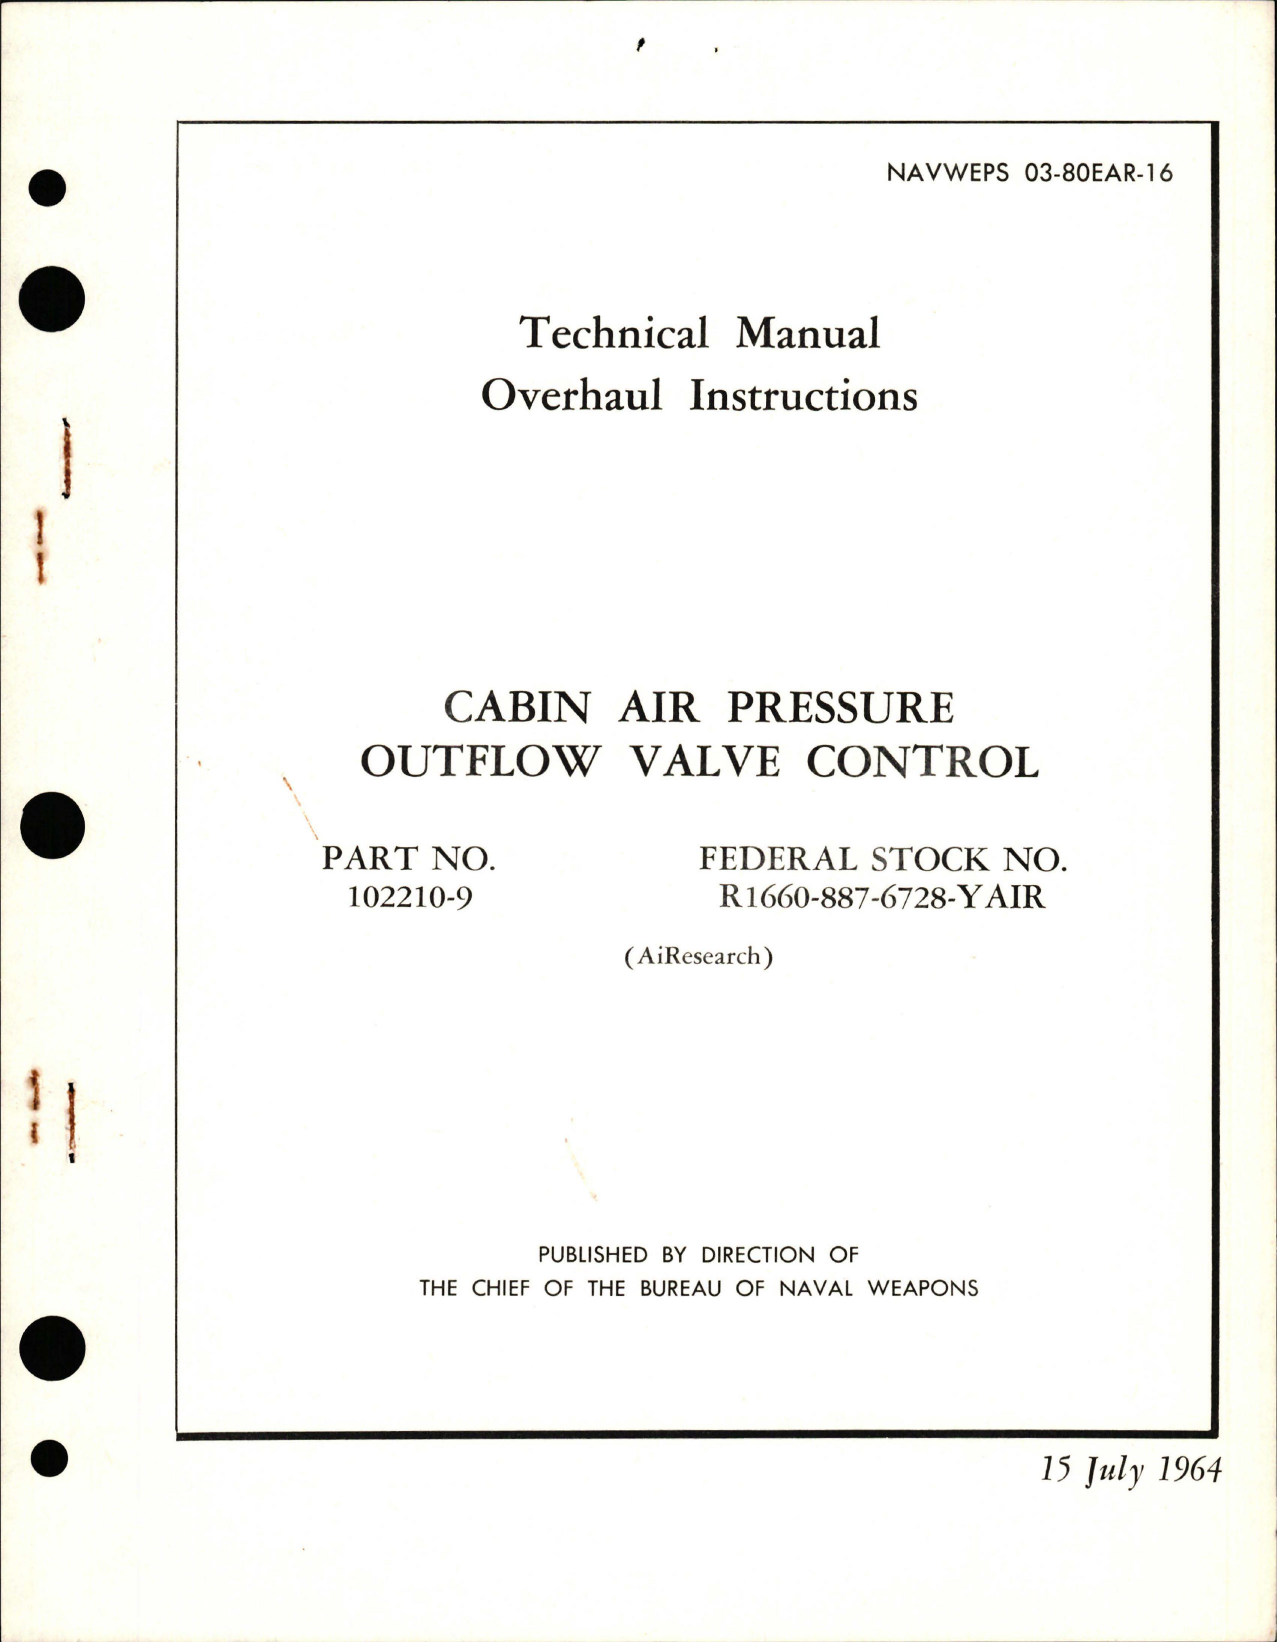 Sample page 1 from AirCorps Library document: Overhaul Instructions for Cabin Air Pressure Outflow Valve Control - Part 102210-9